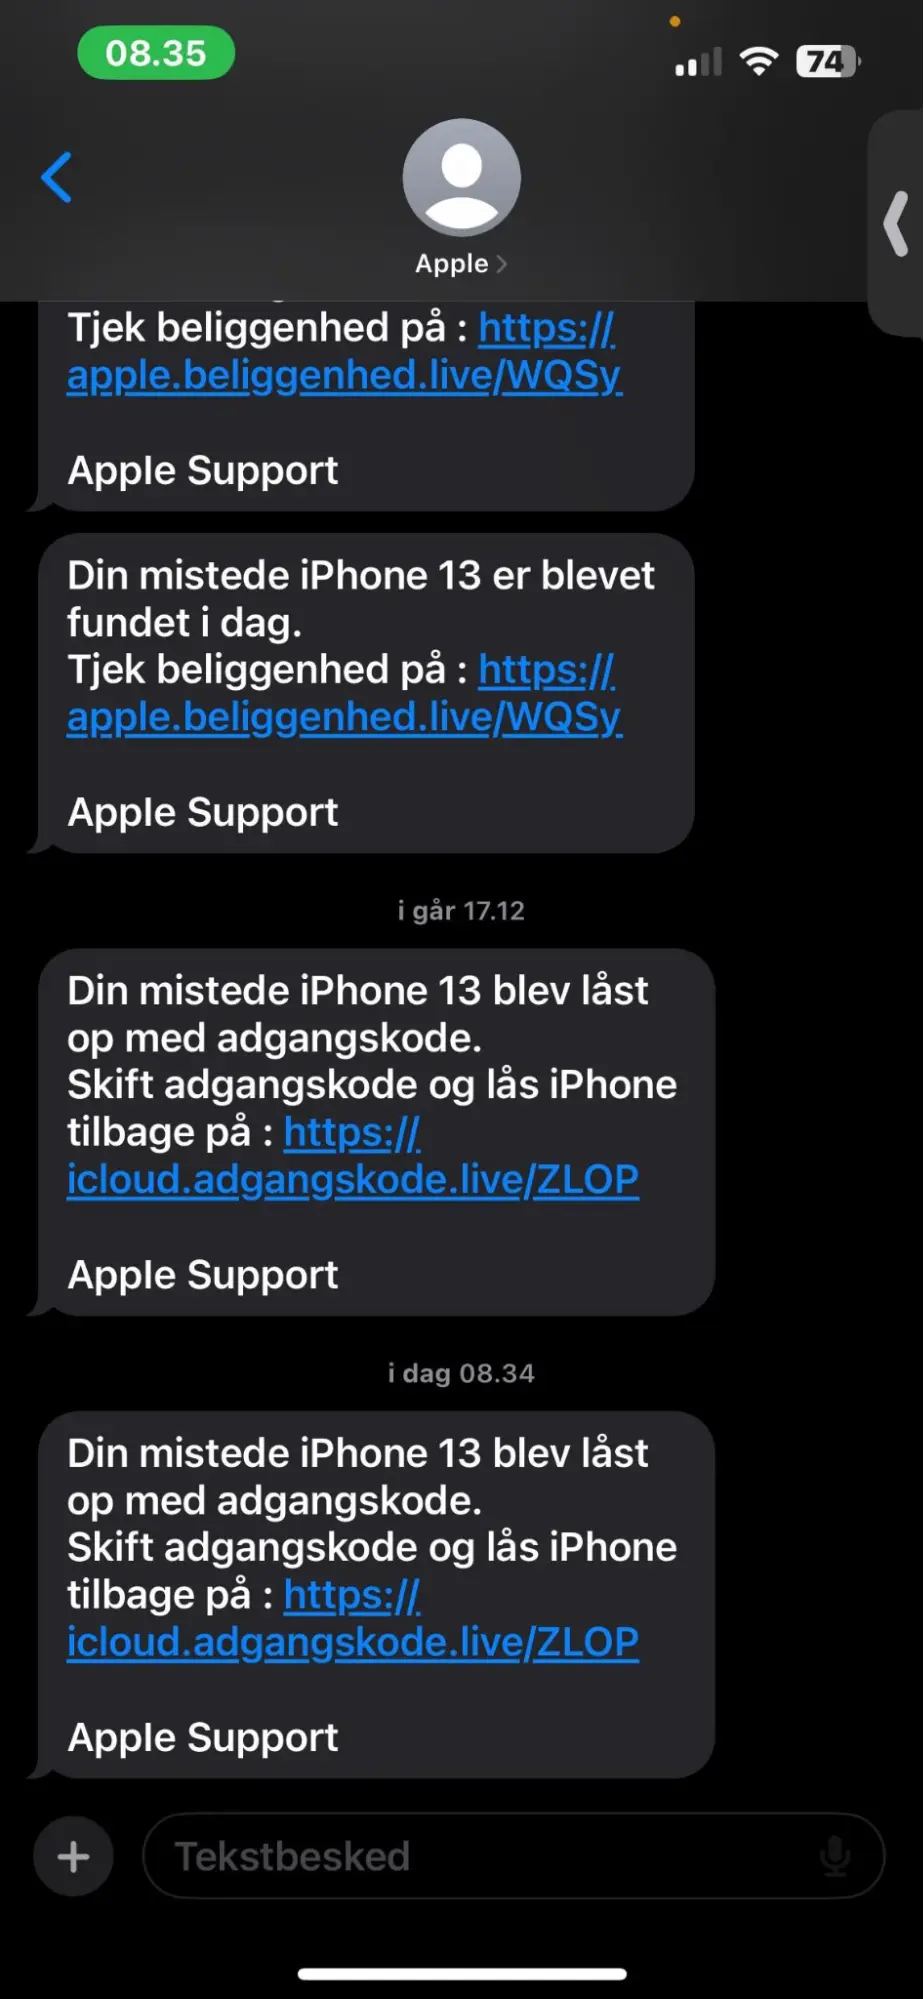 Phishing messages in Danish, using .live domains with Danish names, targeting a Danish user whose relative recently had their phone stolen.